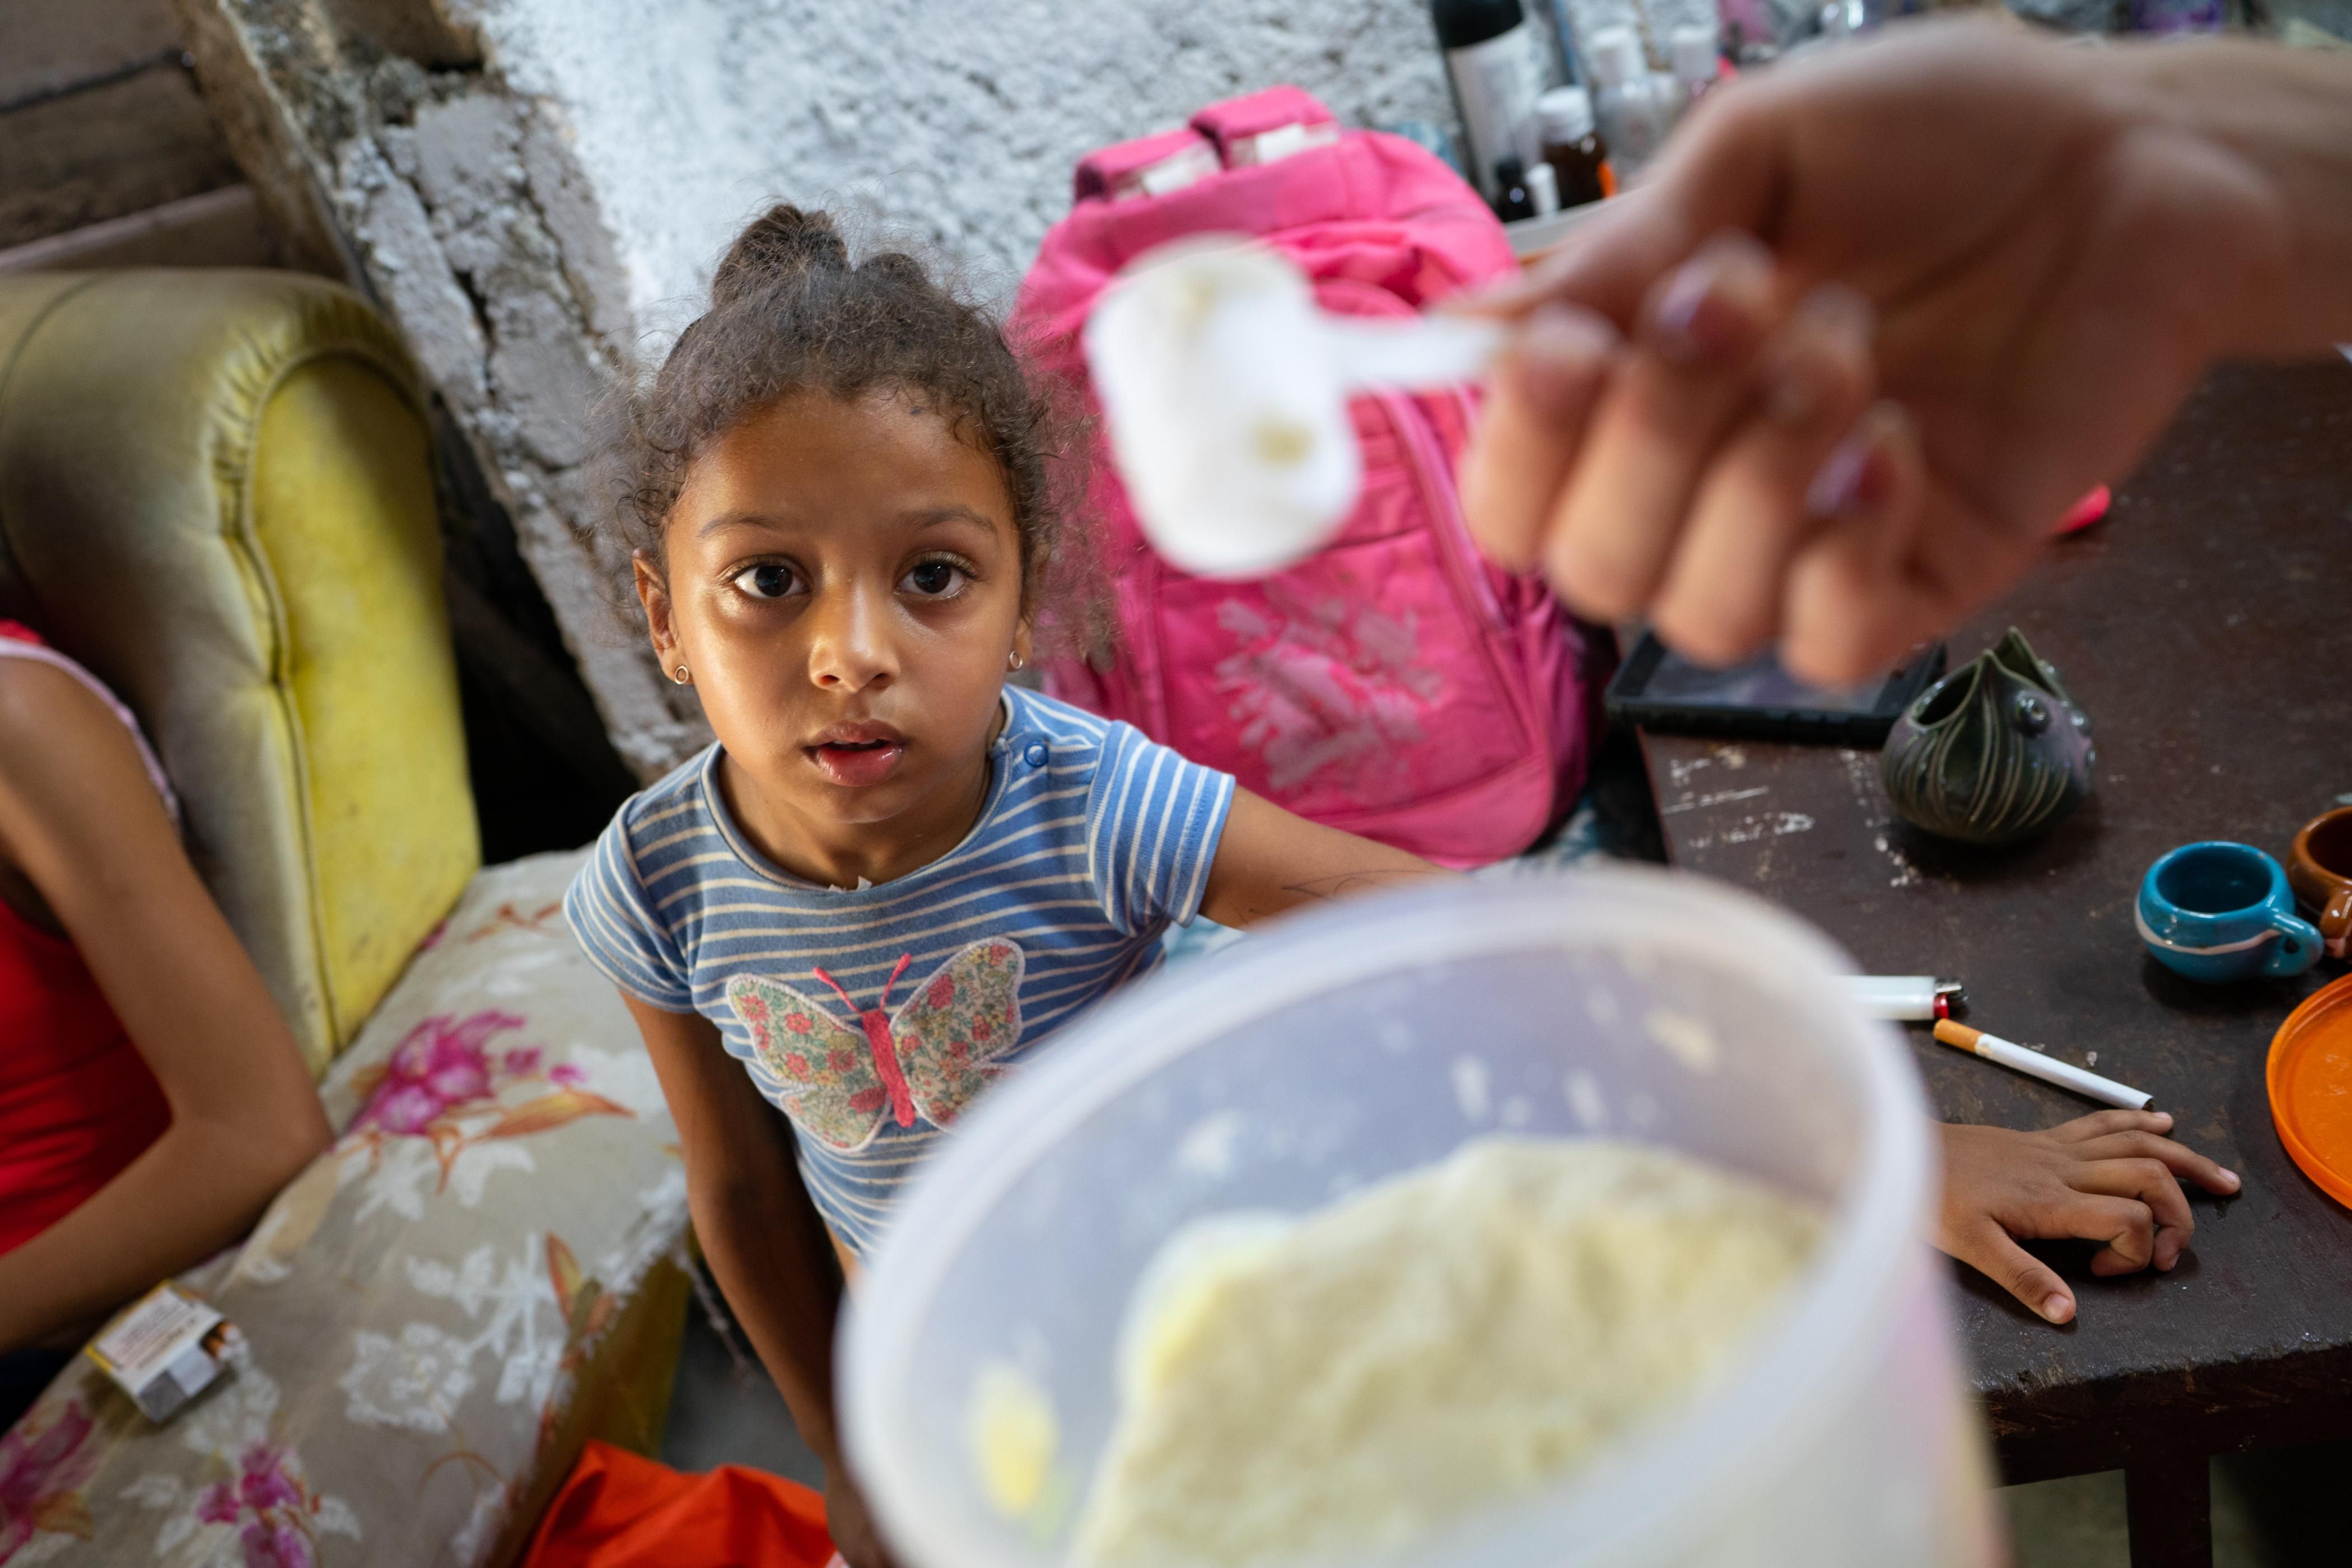 Laurent Alemany, 4, looks at the small amount of powdered milk her mother, Yohana Perdomo, 28, has left in their home in Havana, Cuba on April 16, 2022. 